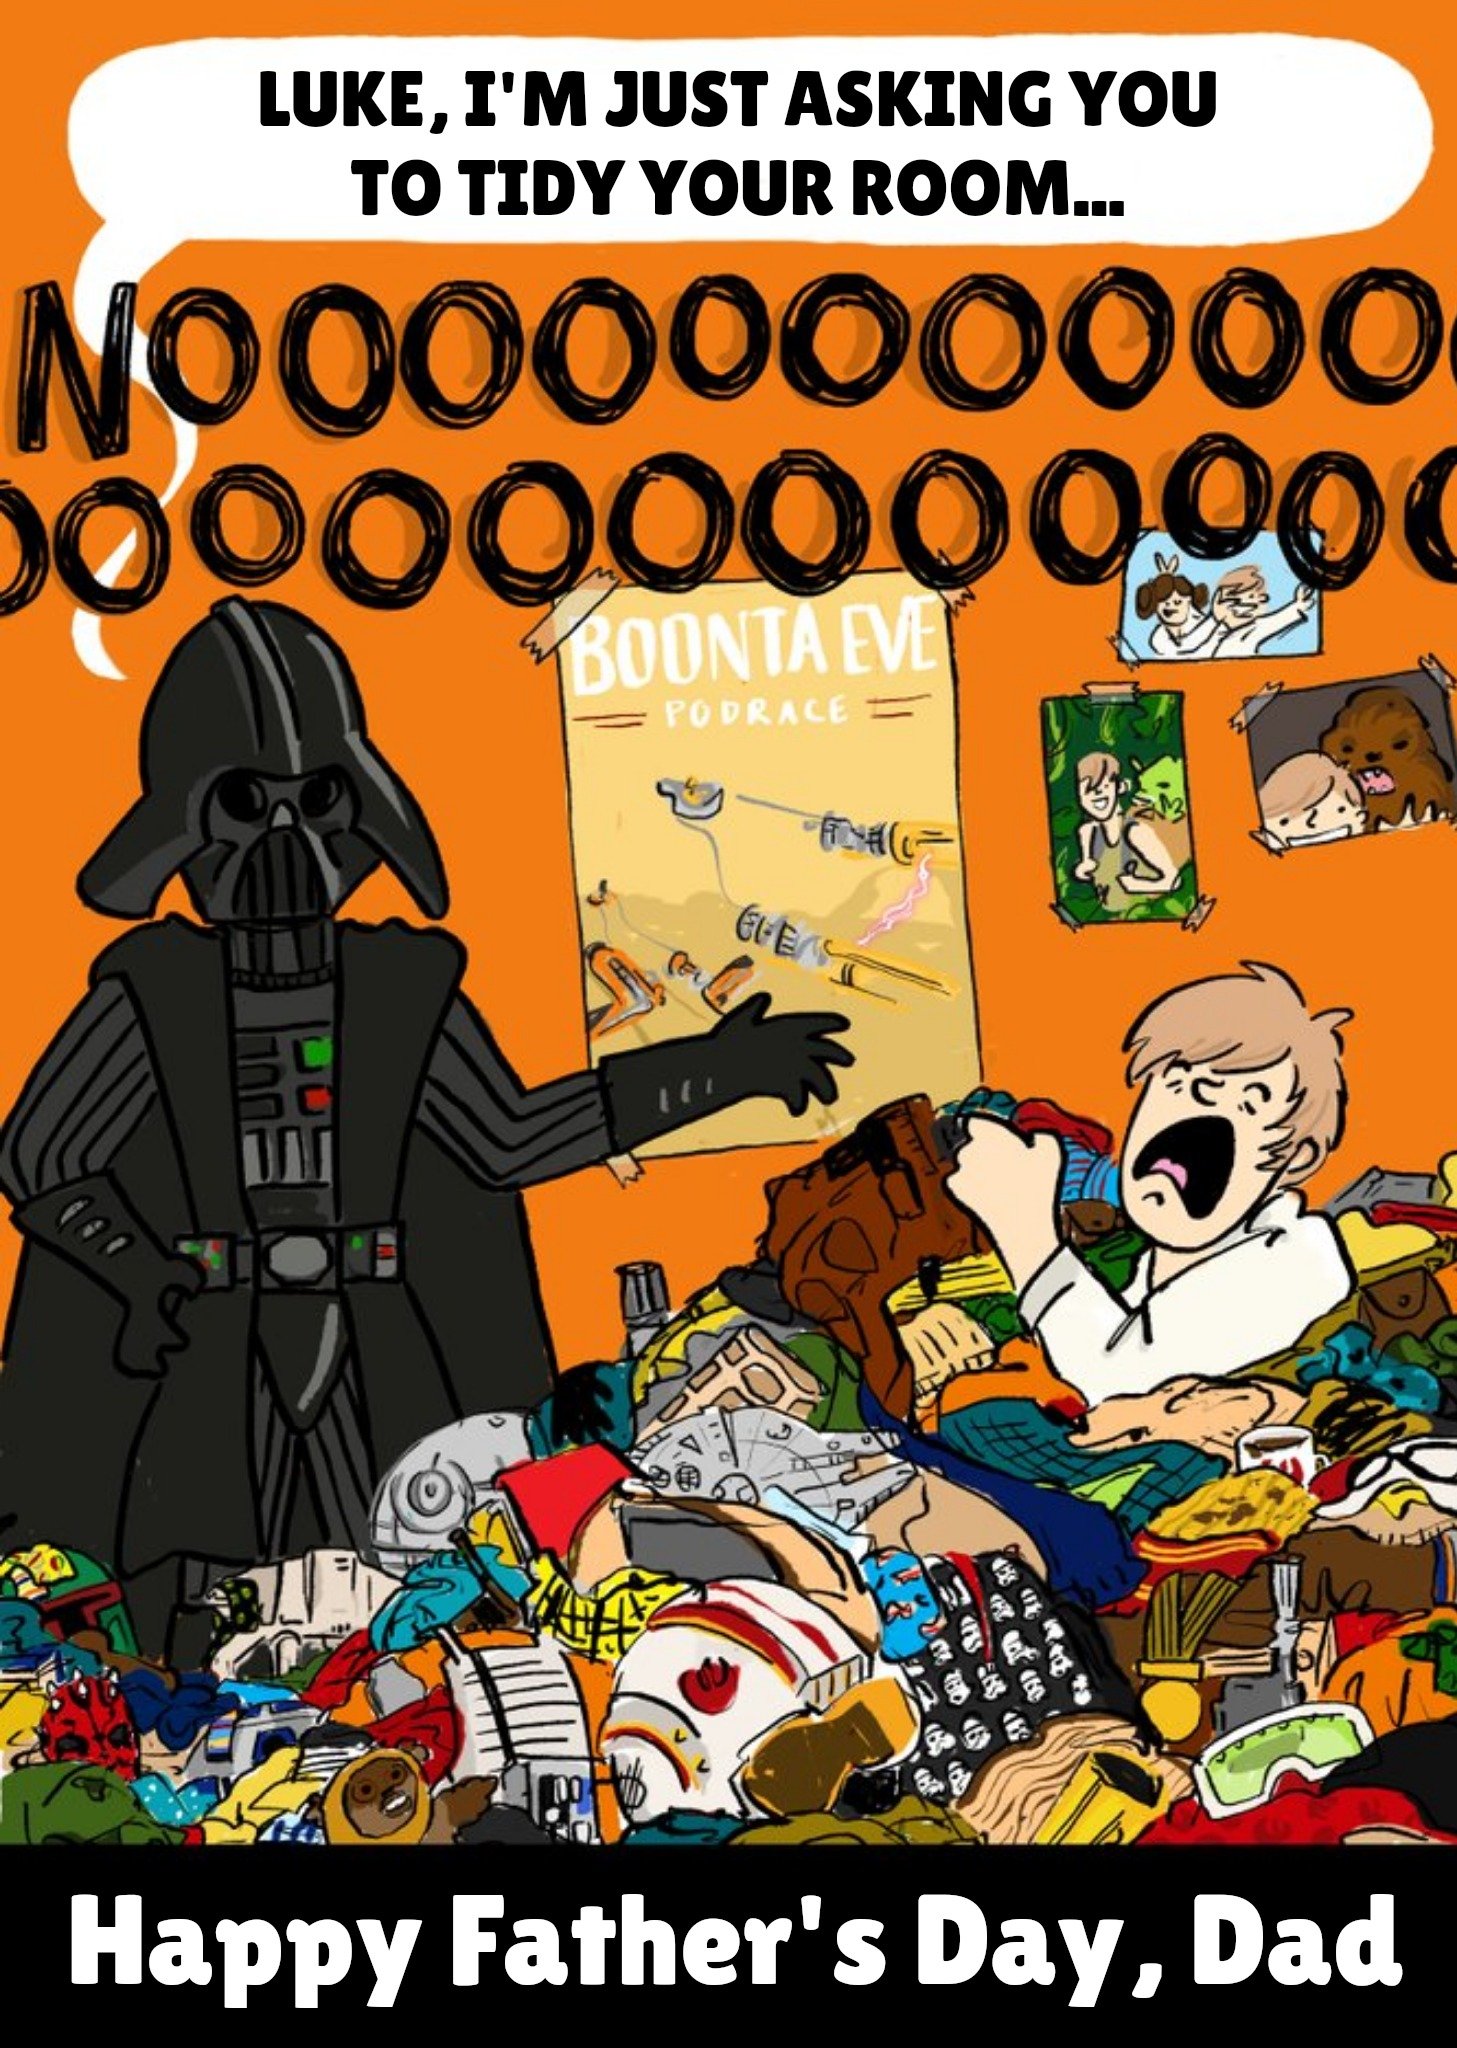 Disney Star Wars Darth Vader & Luke Tidy Your Room Funny Father's Day Card Ecard